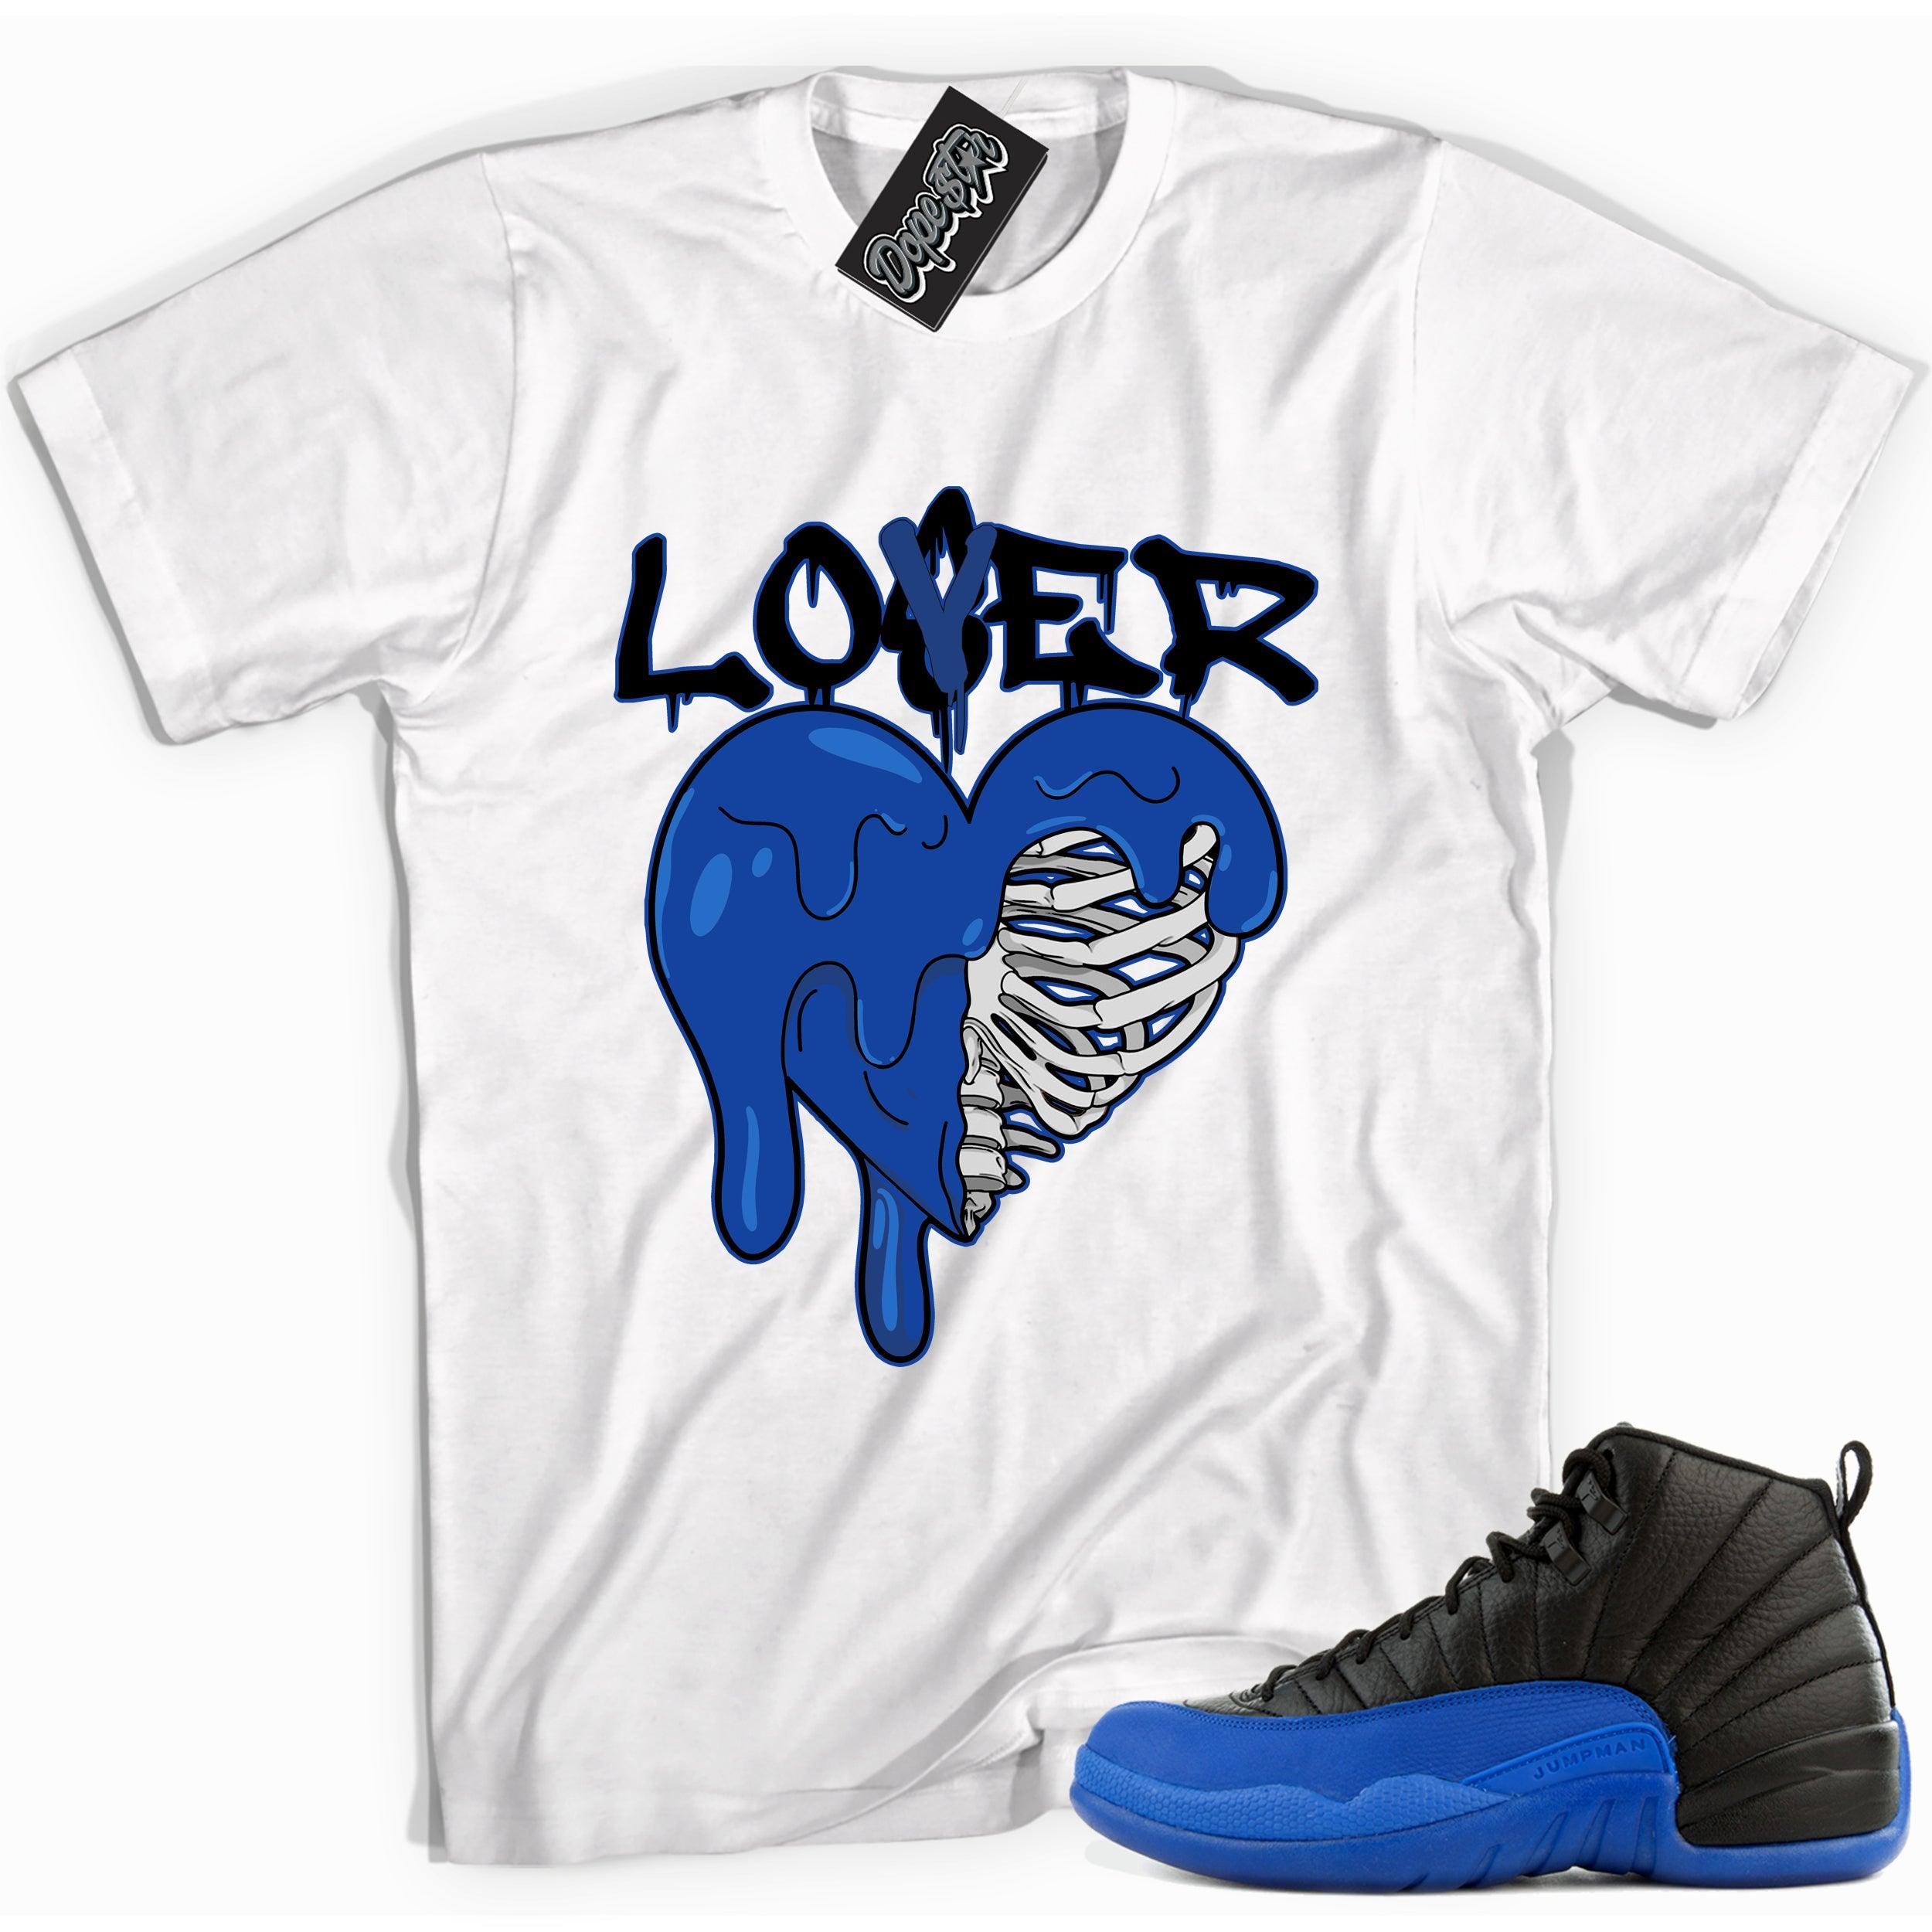 Cool white graphic tee with 'lover loser' print, that perfectly matches  Air Jordan 12 Retro Black Game Royal sneakers.